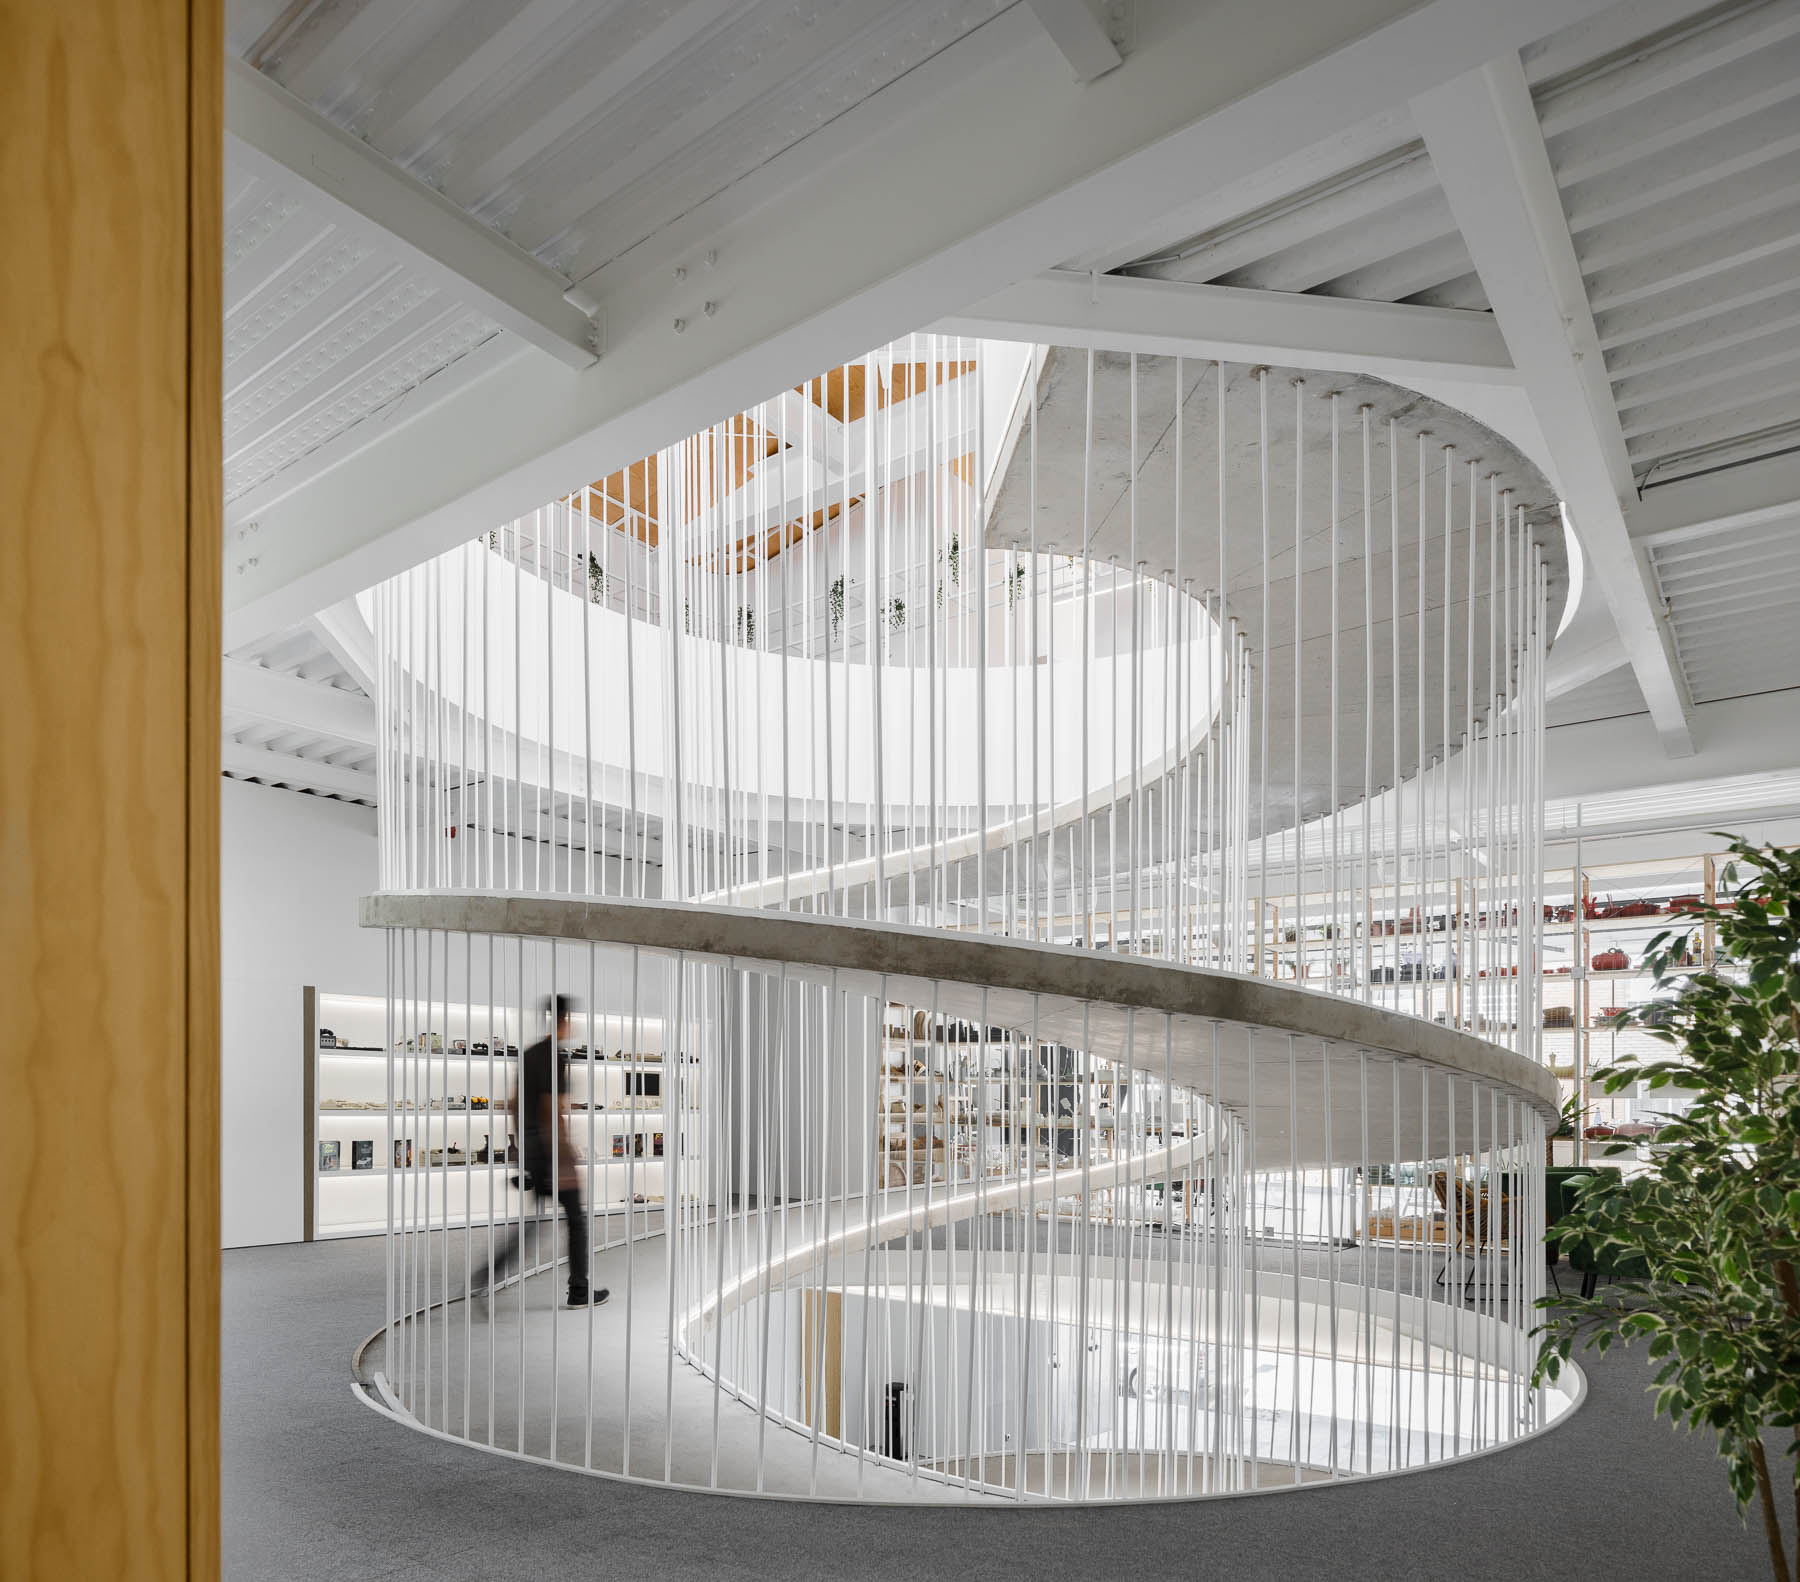 A spiraling ramp replaces the need for stairs in this modern office and adds a sculptural element.